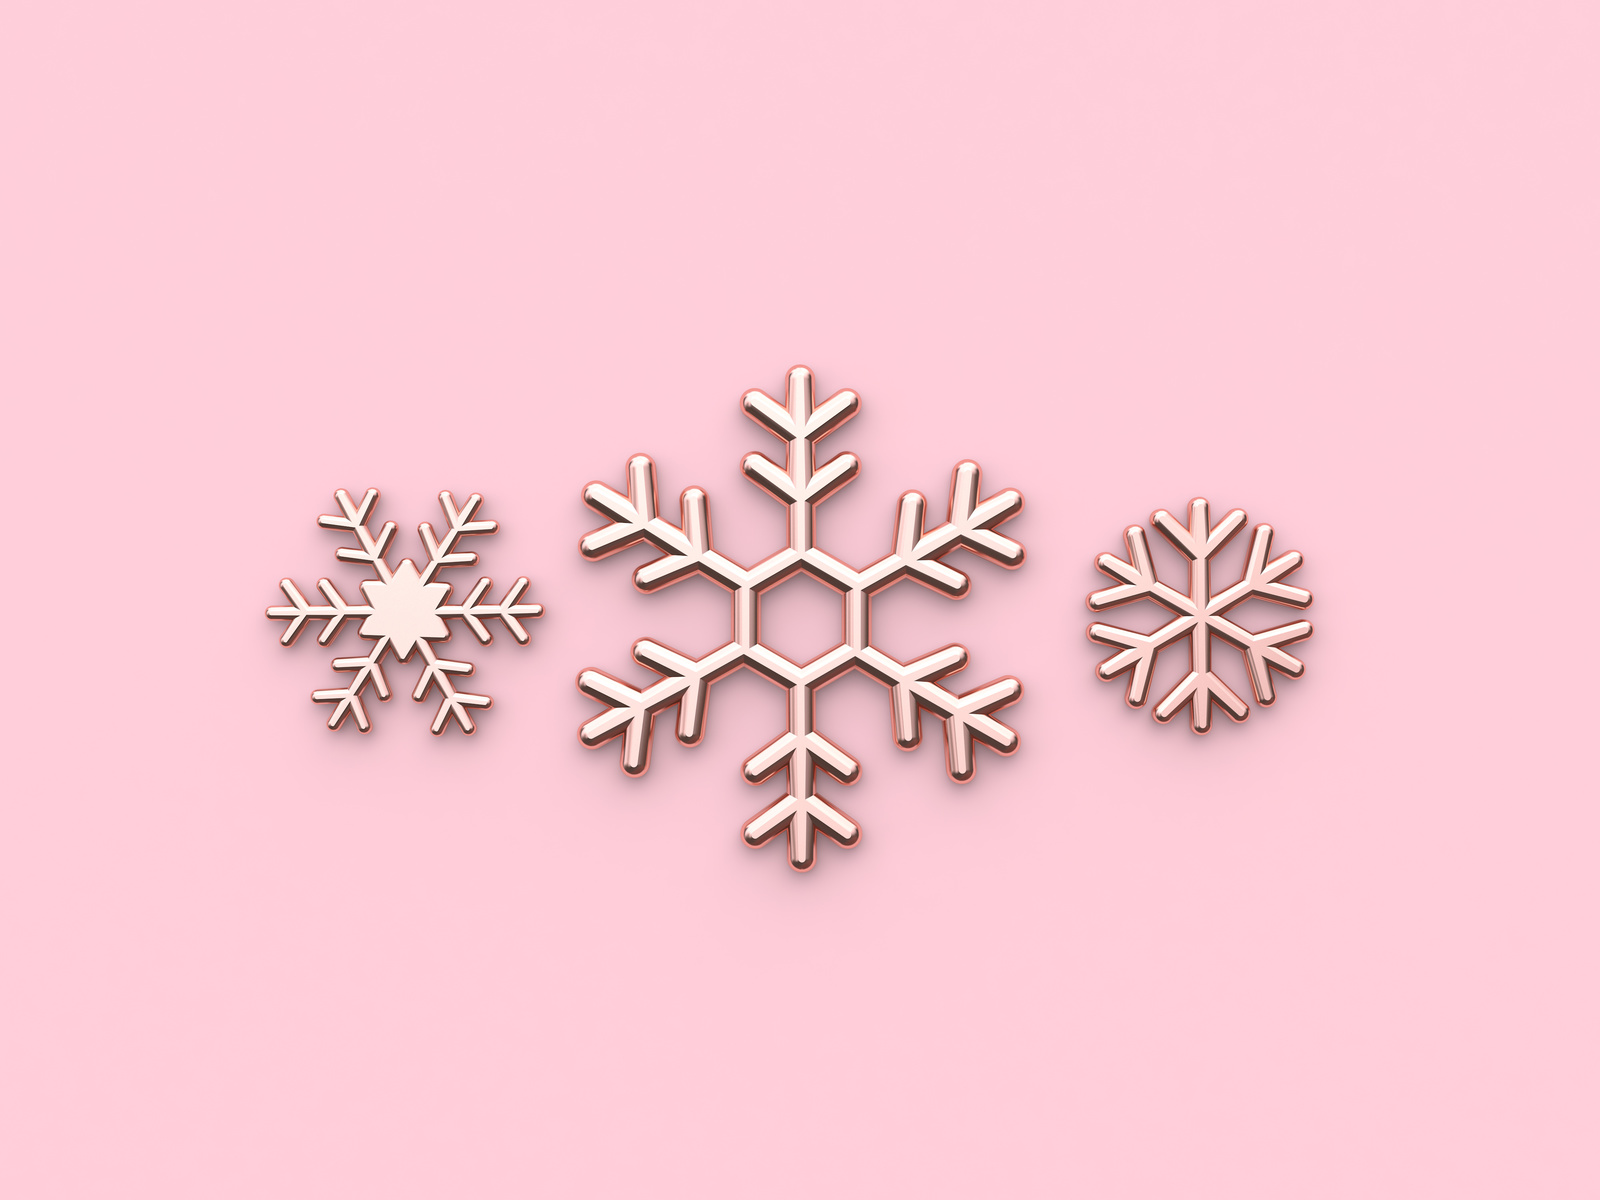 , , , , , , , new, year, winter, snowflakes, background, pattern, pink